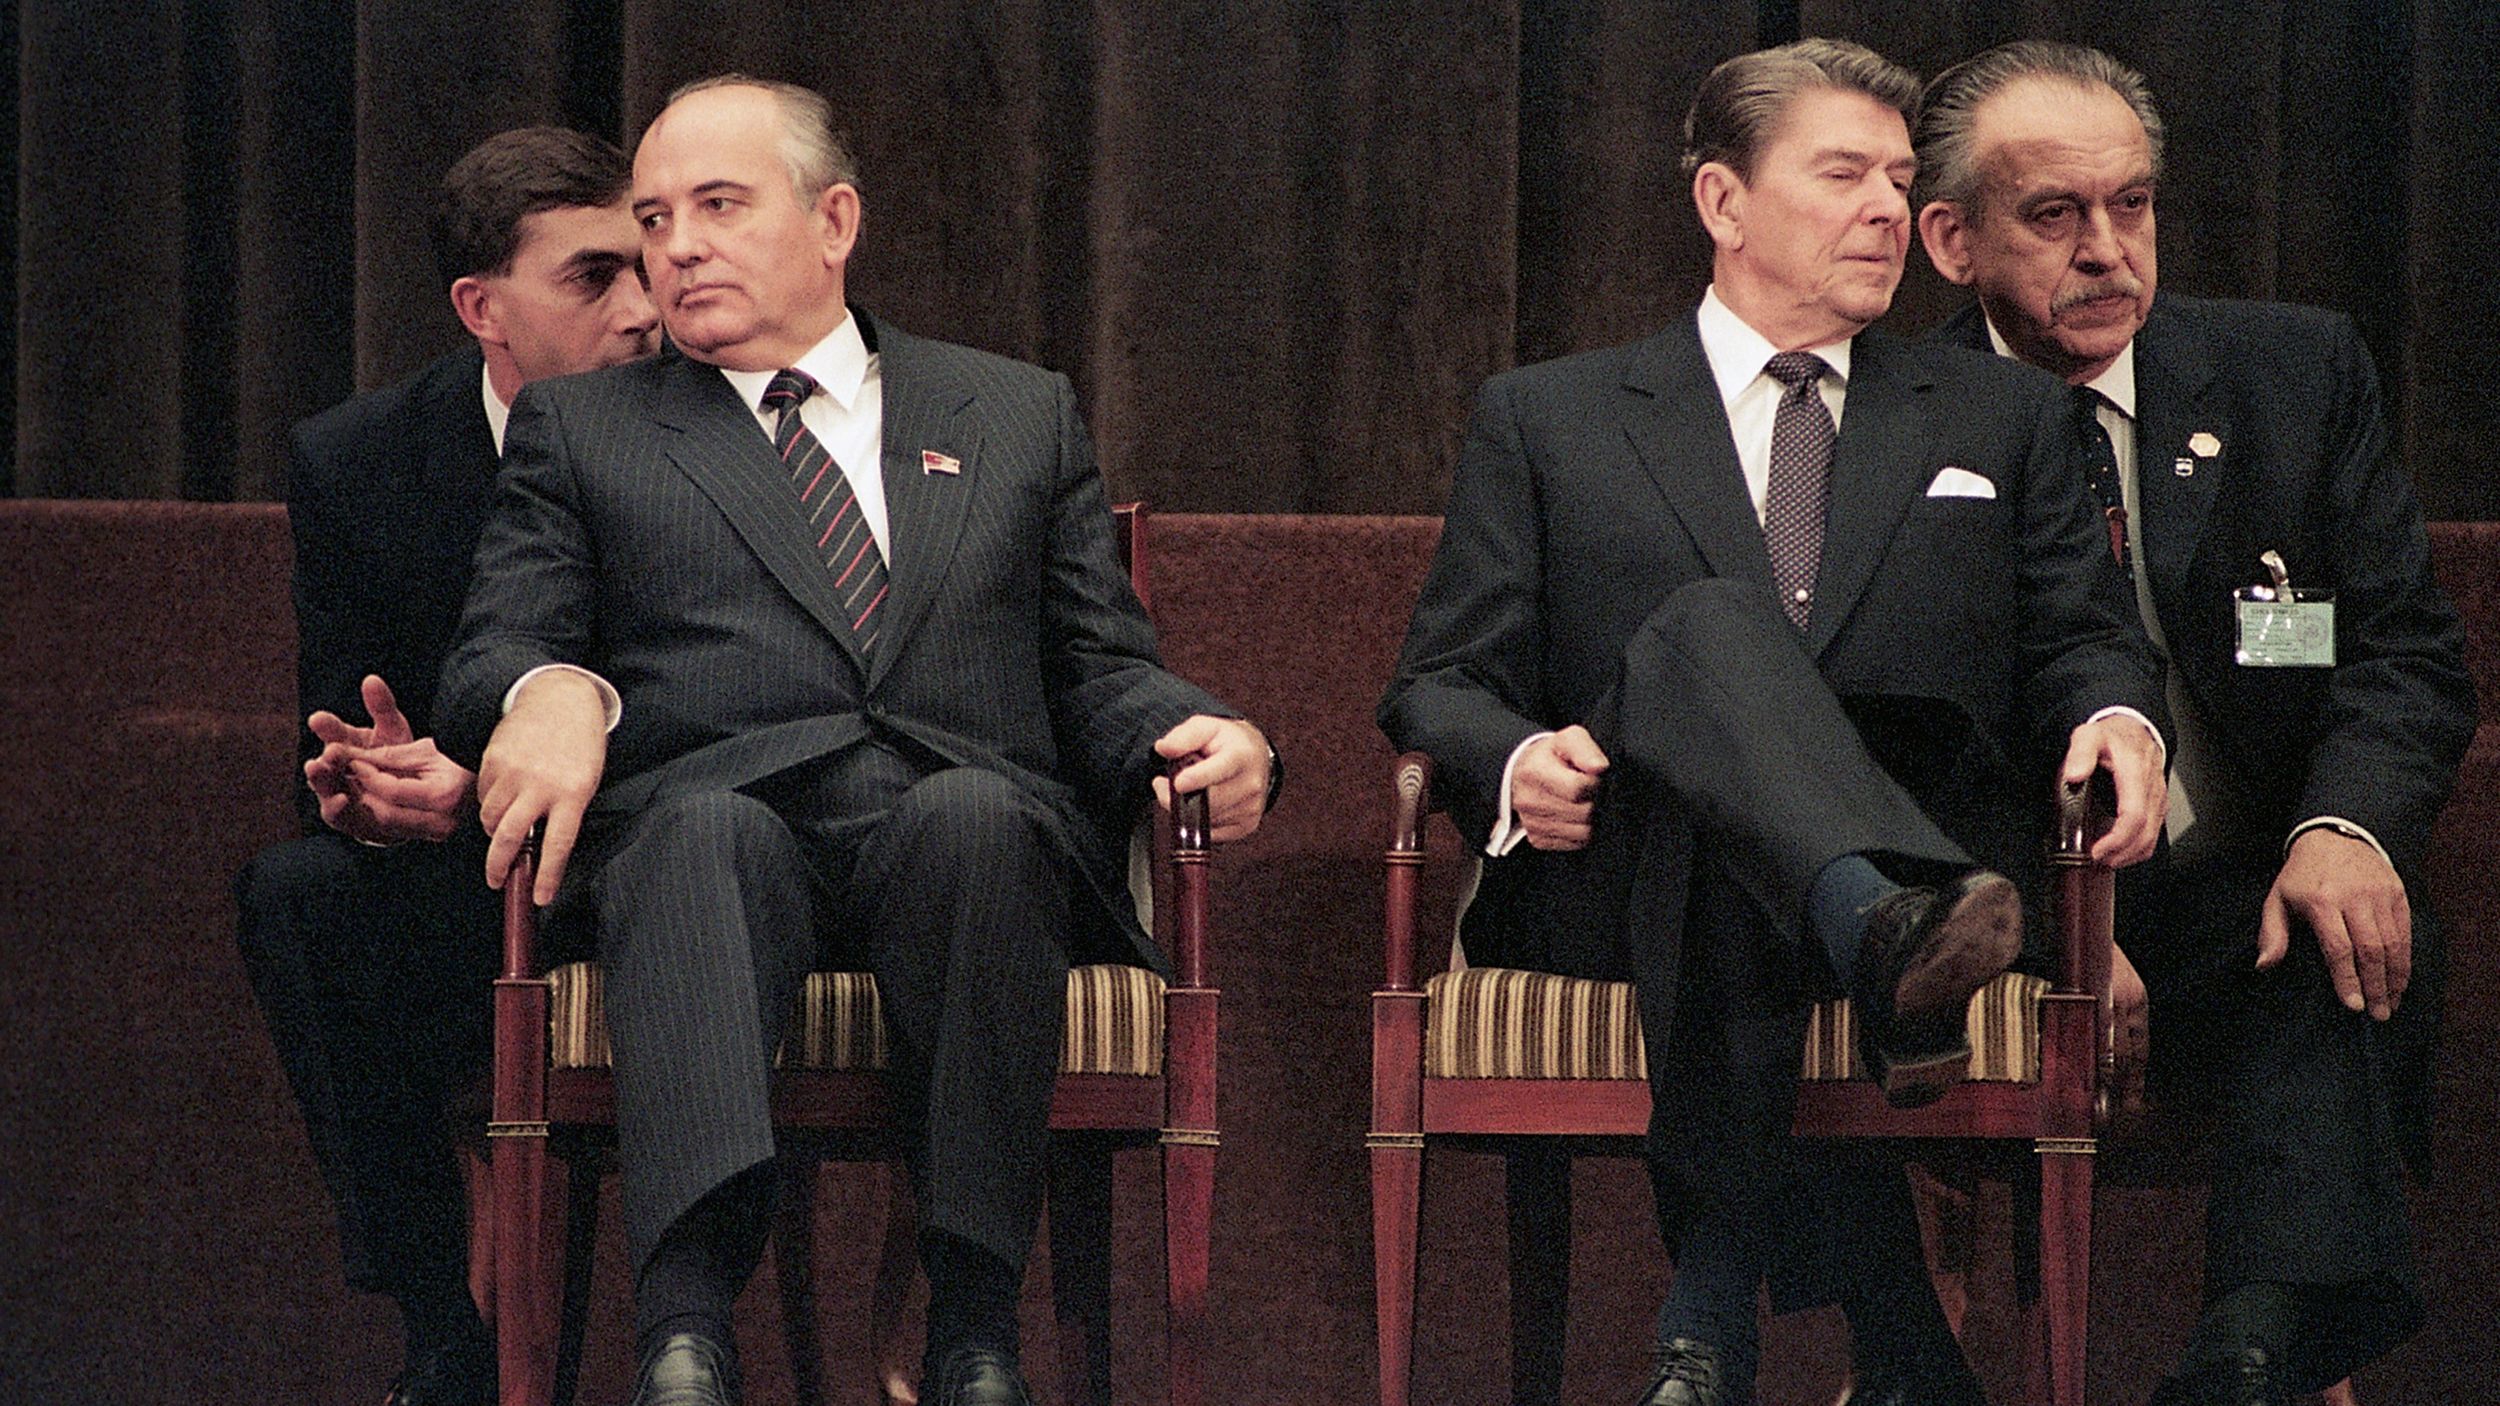 Gorbachev and Reagan attend the closing ceremony for the Geneva Summit in November 1985.